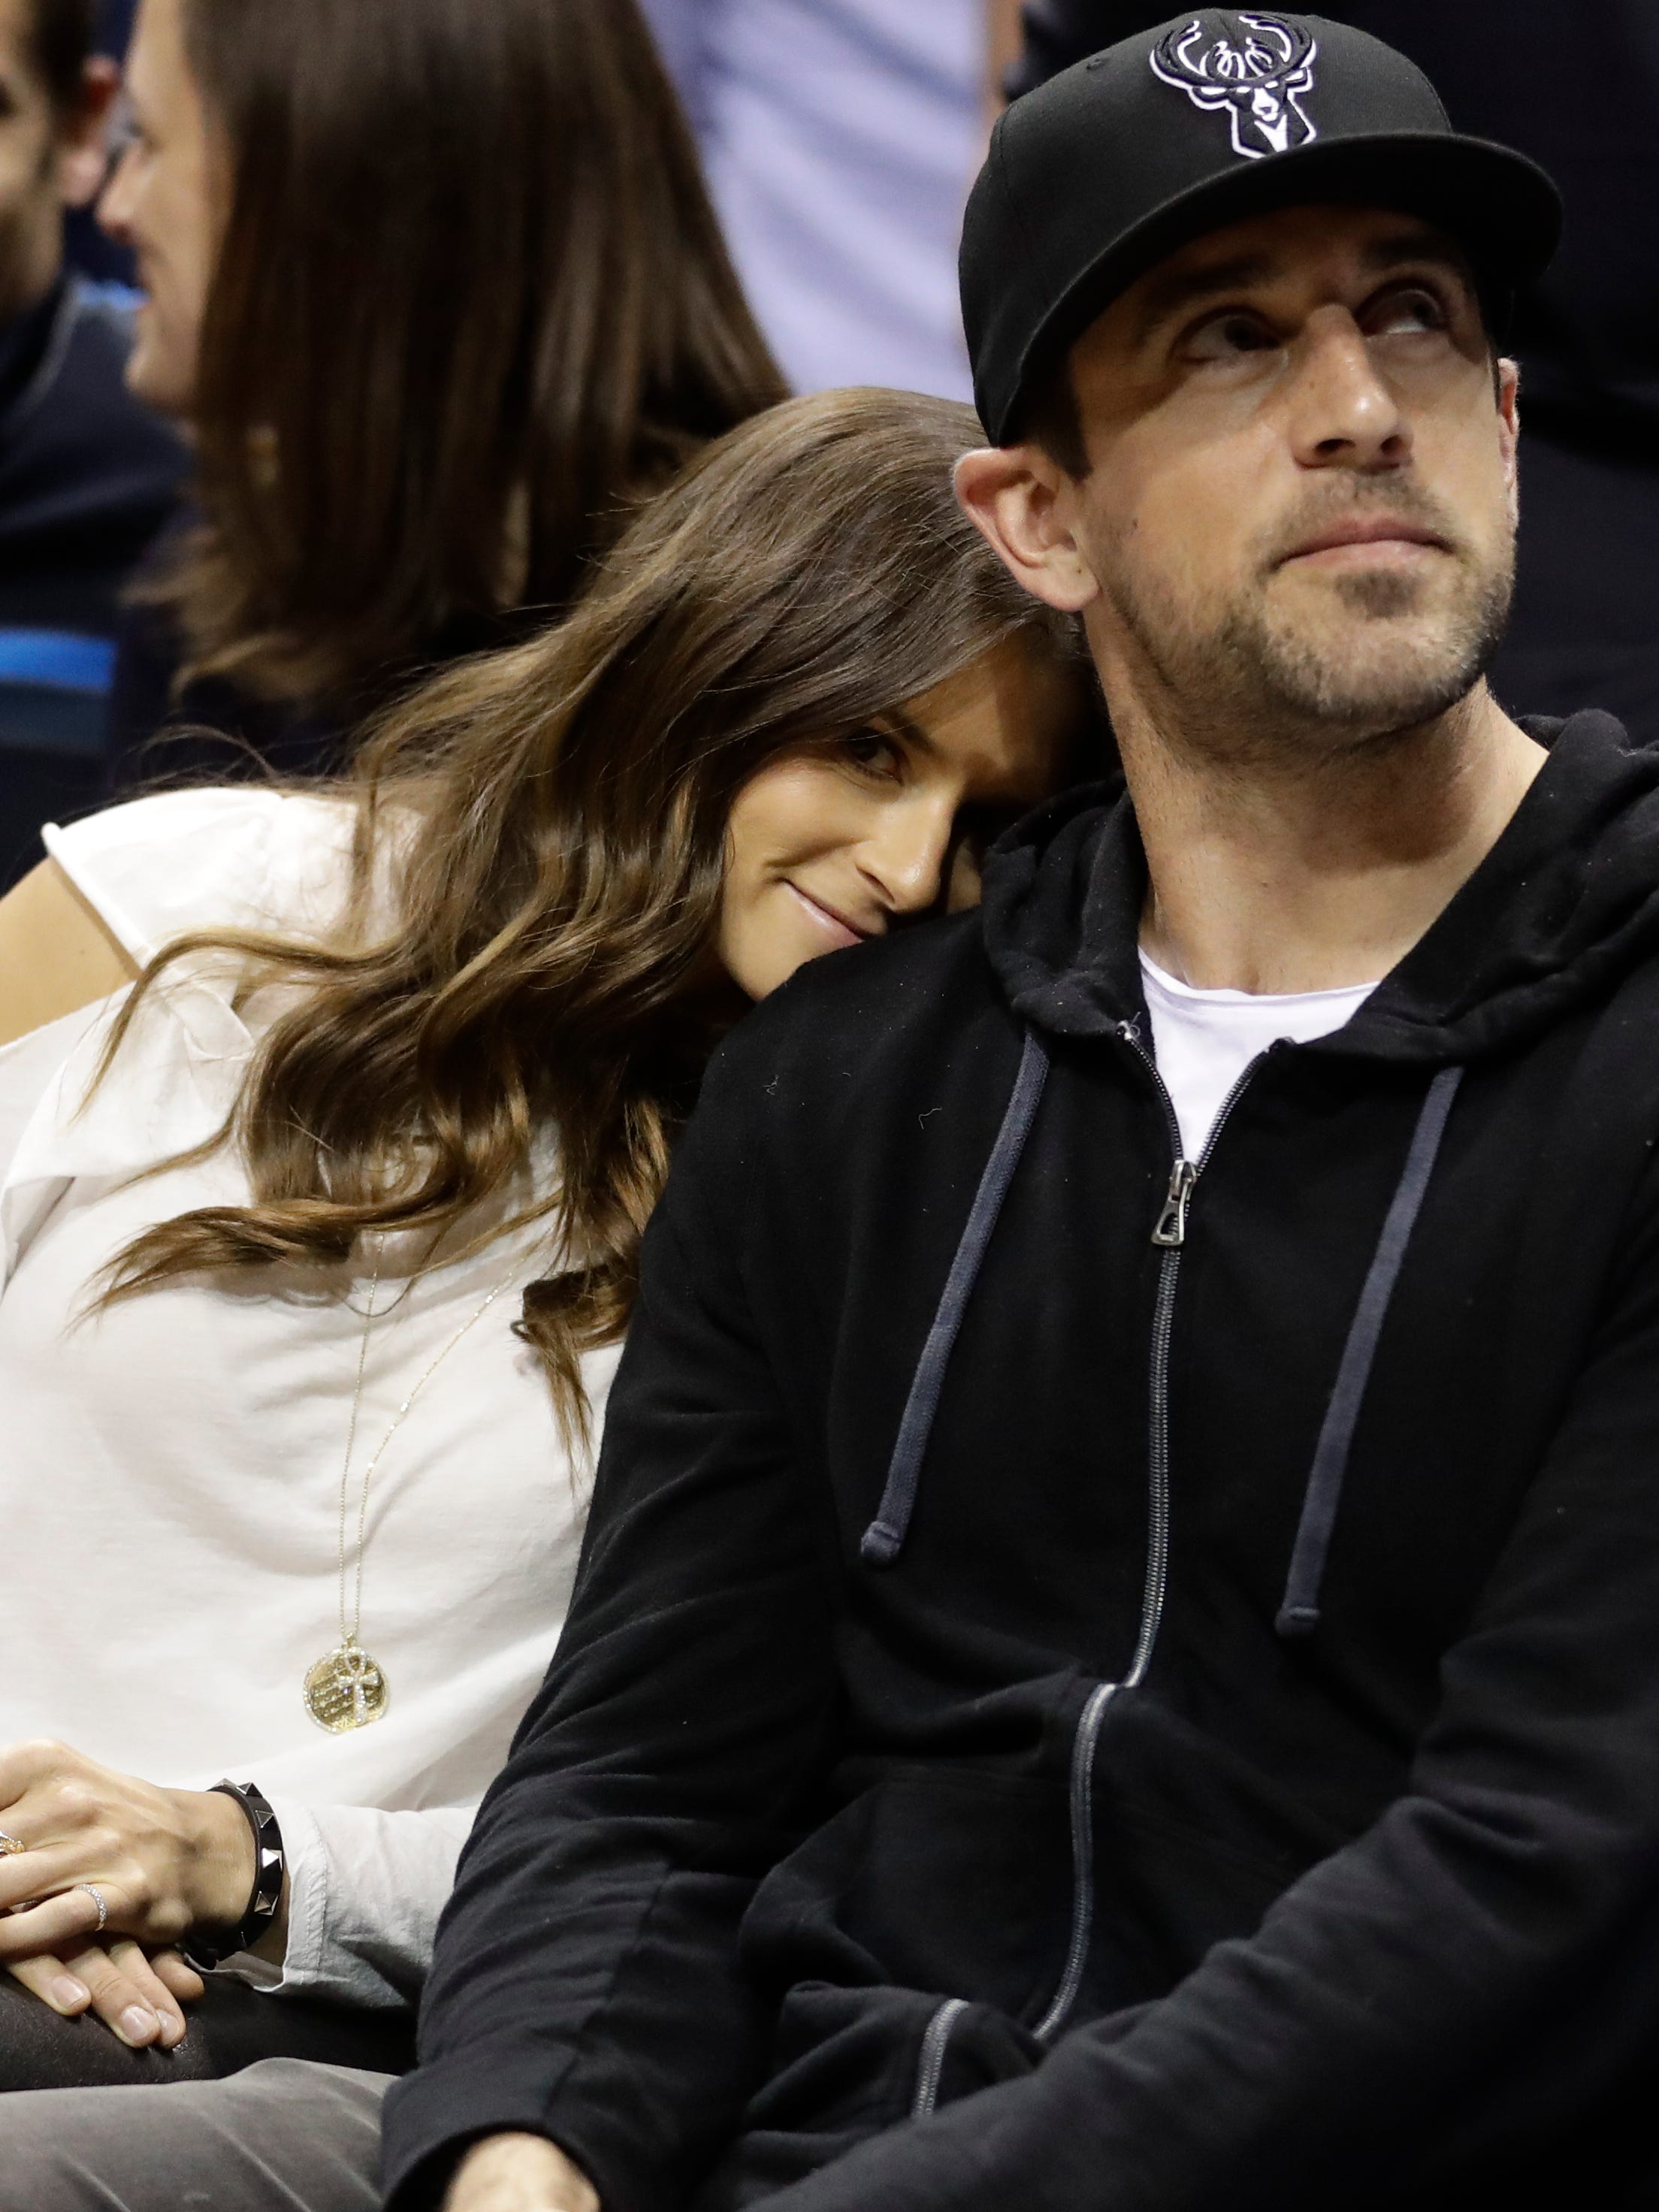 Danica Patrick and Aaron Rodgers watch Game 3 between the Bucks and the Celtics in Milwaukee.